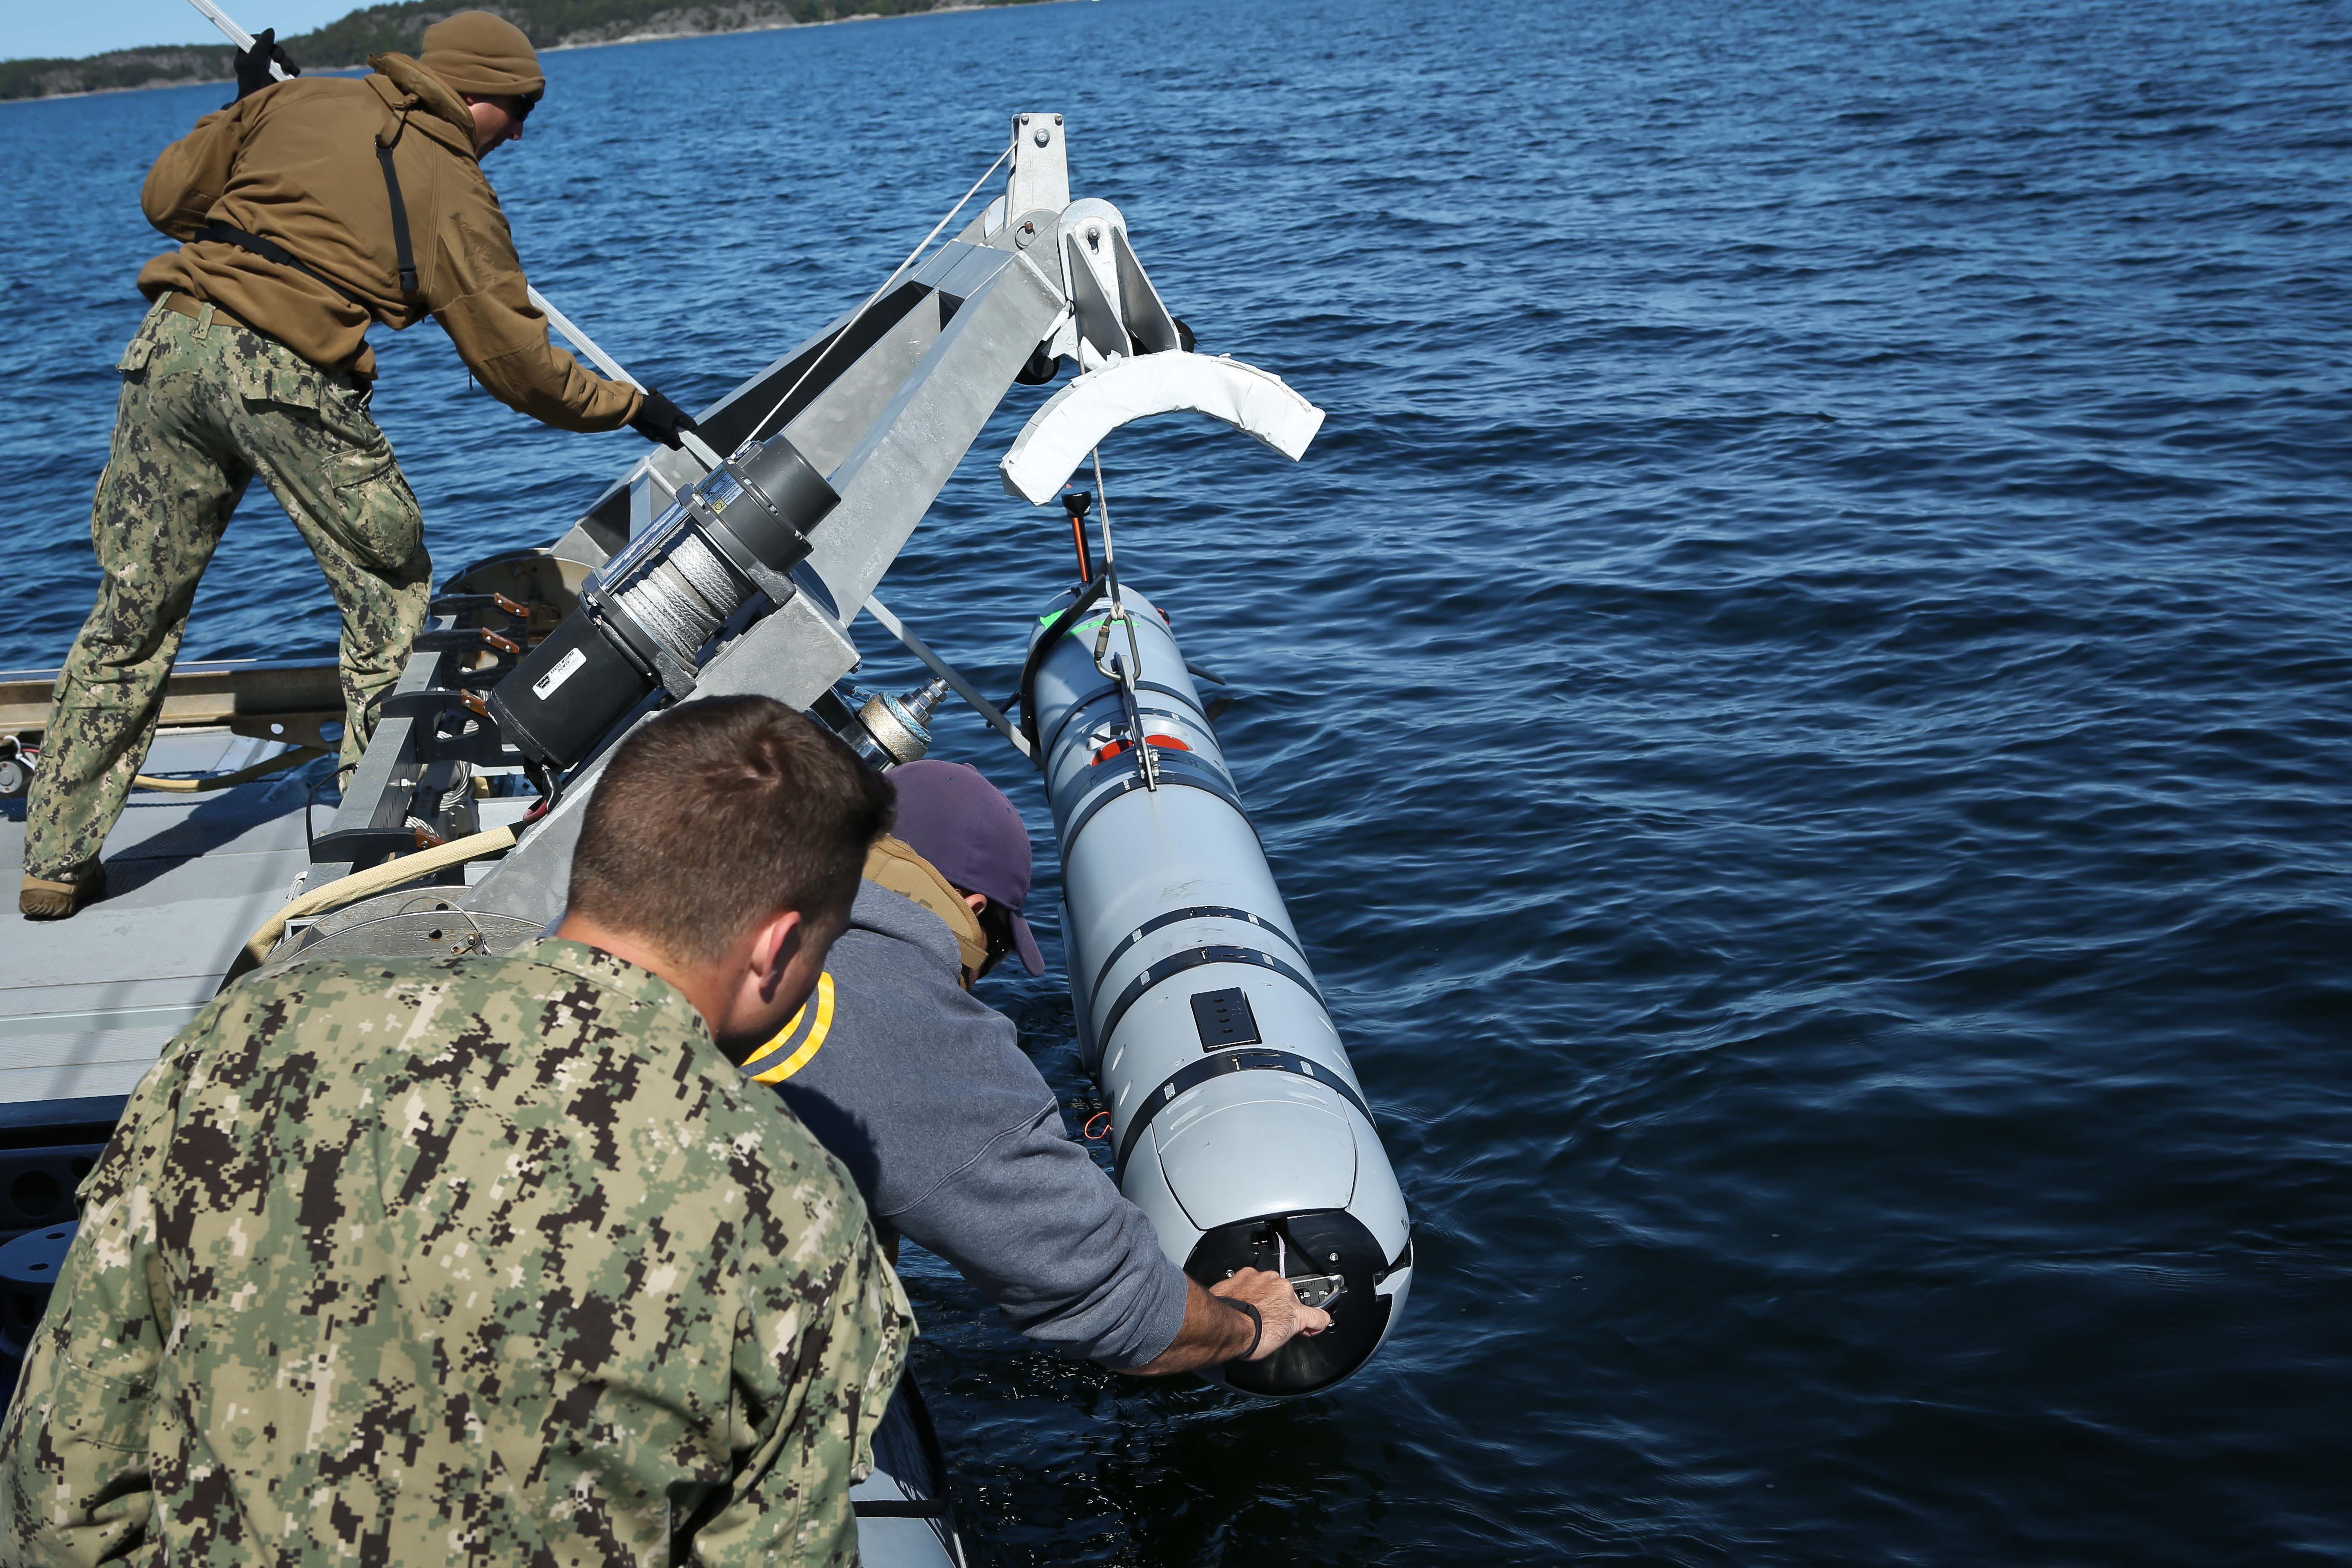 Sailors attached to Mobile Diving and Salvage Unit Two in Little Creek, Va., prepare to insert an unmanned underwater vehicle (UUV) into the Baltic Sea to search for underwater mines during BALTOPS 2016. US Navy photo.